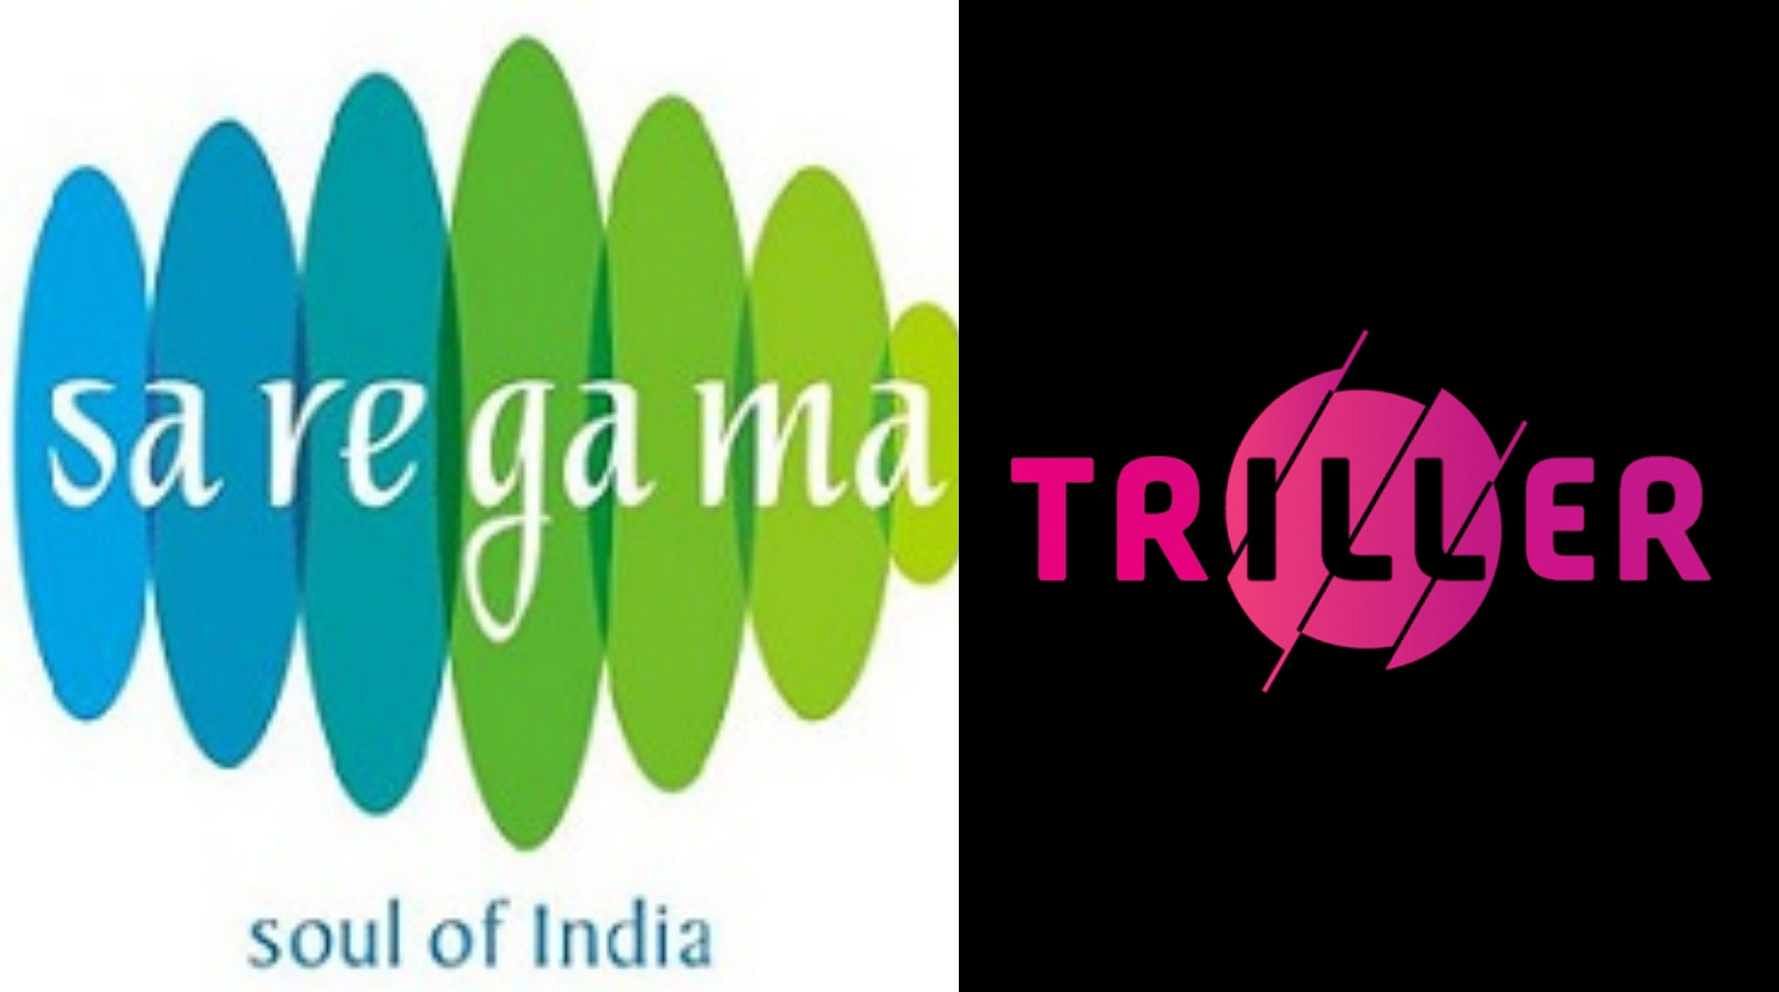 Saregama inks global licensing deal with YouTube